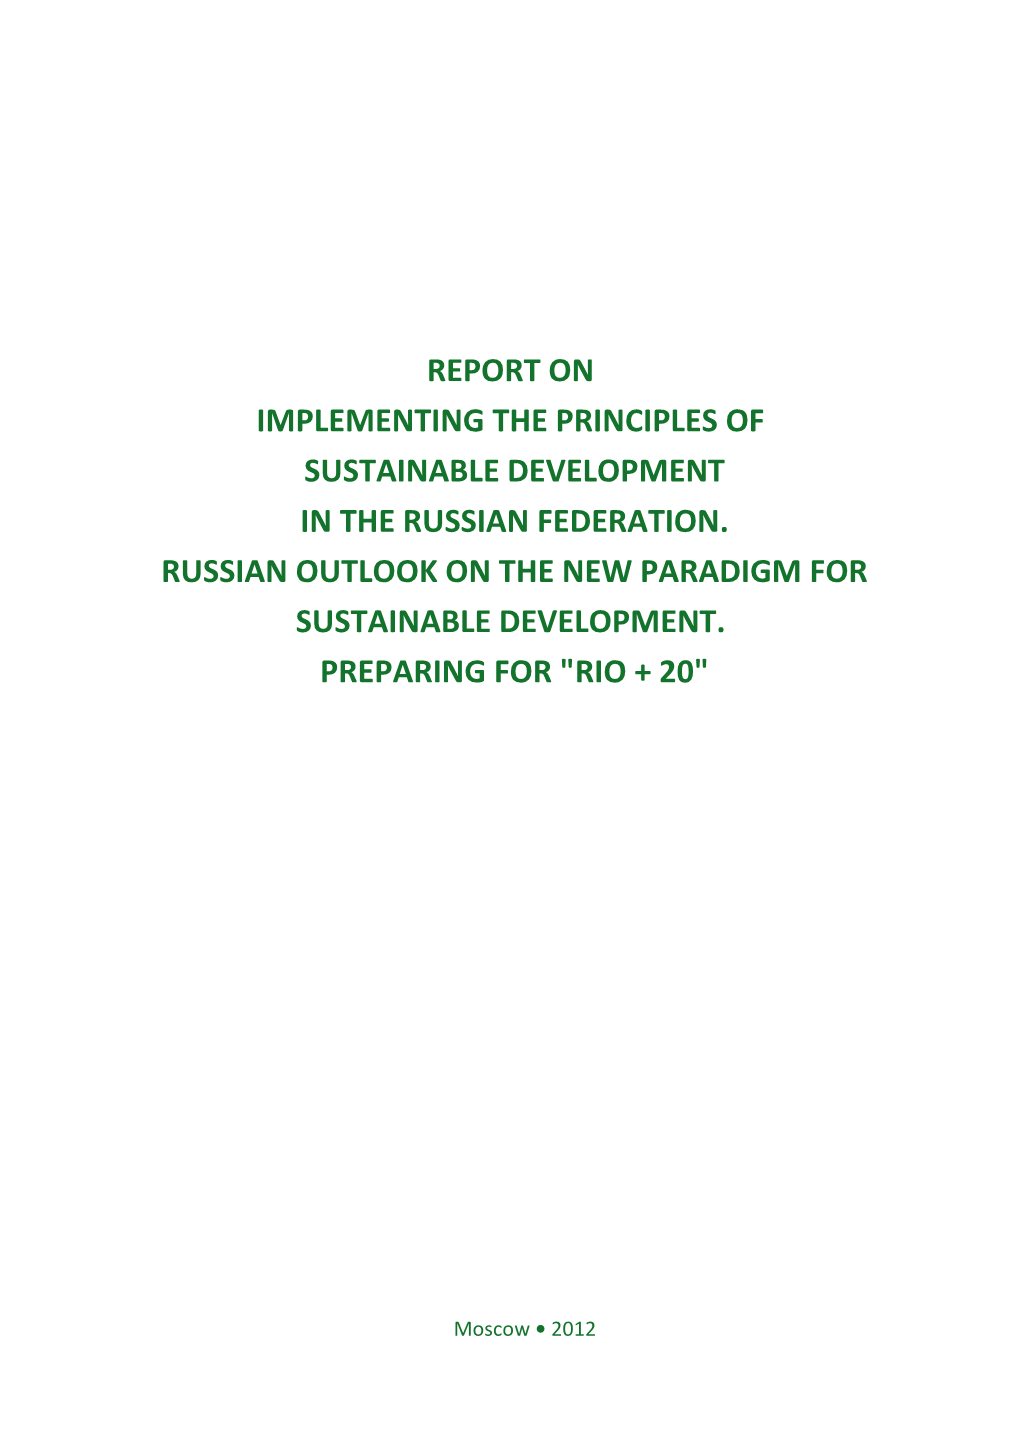 Report on Implementing the Principles of Sustainable Development in the Russian Federation